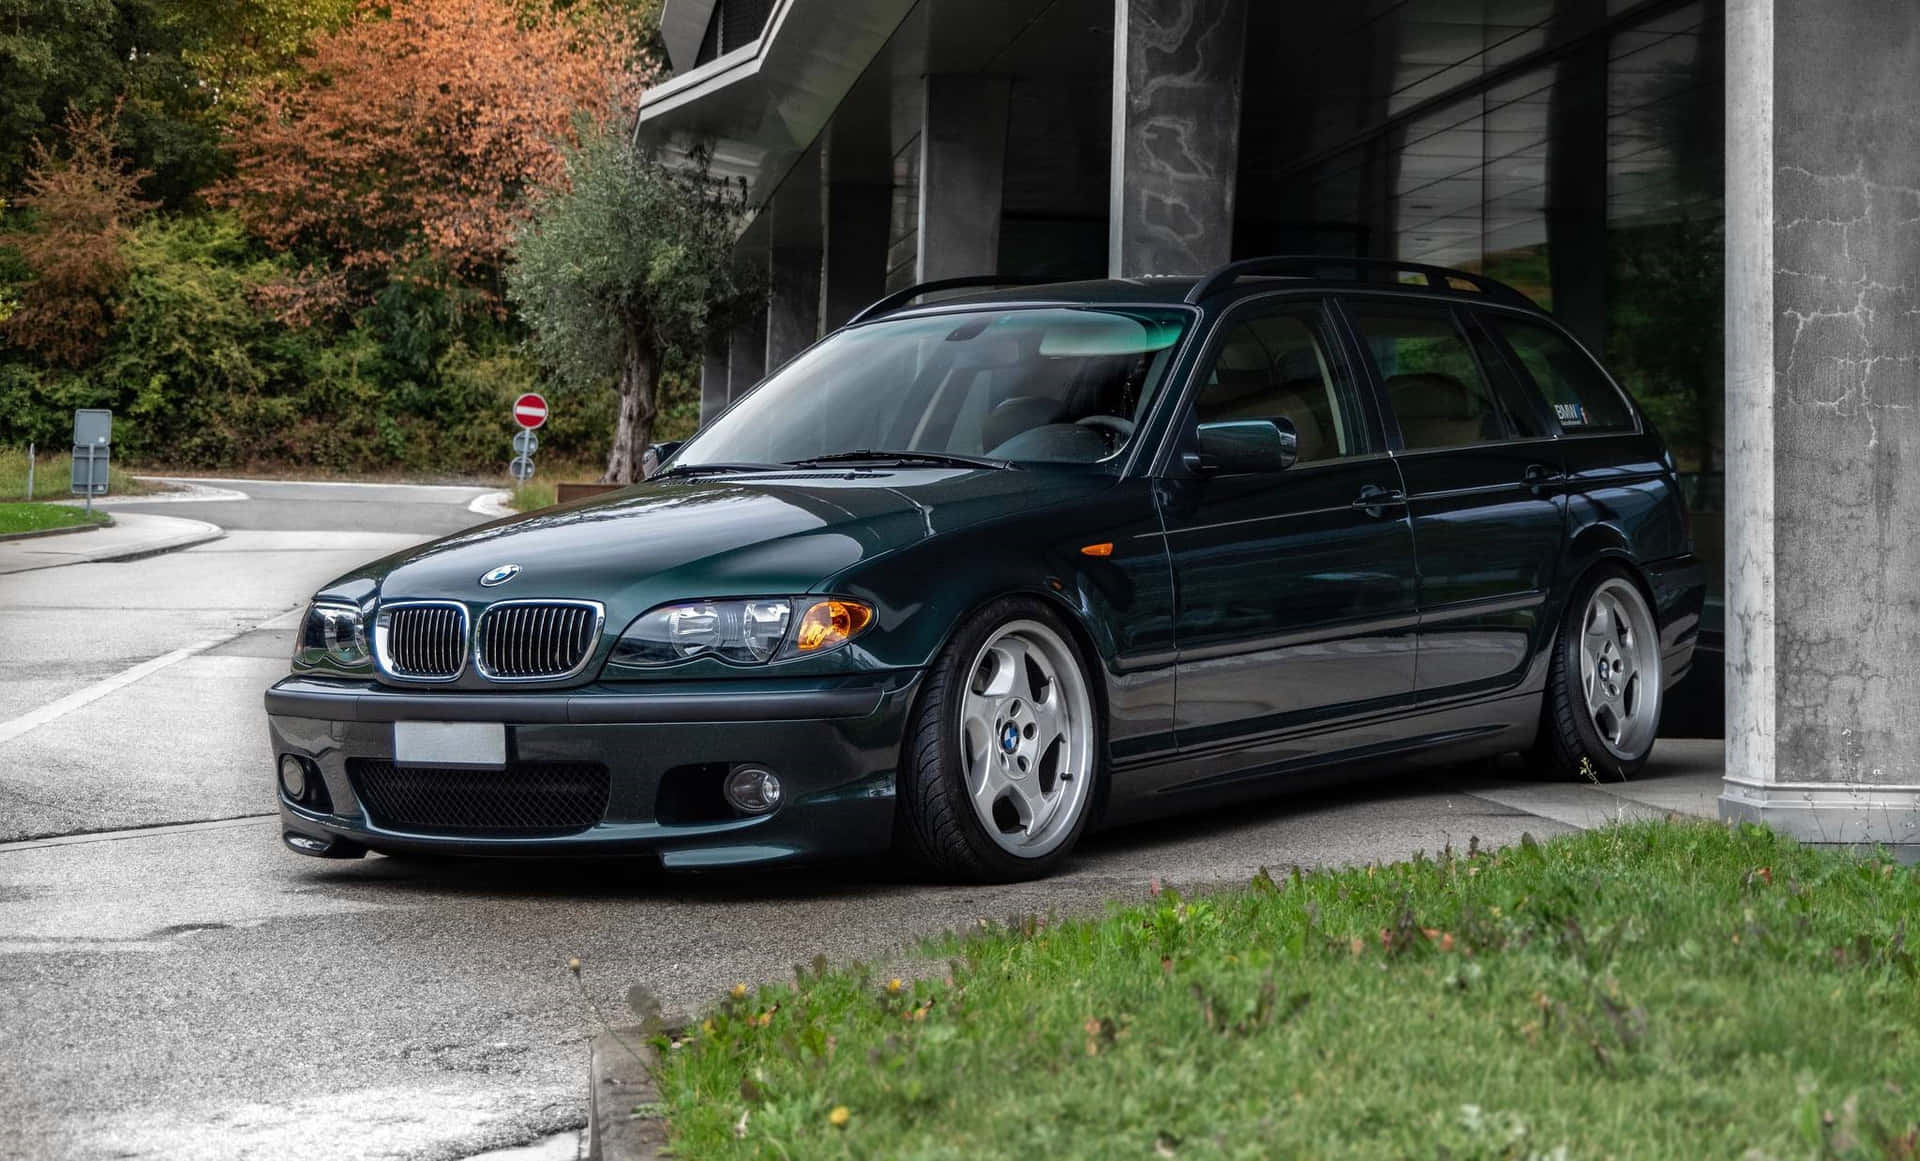 B M W E46 Touring Green Parked Outdoors Wallpaper